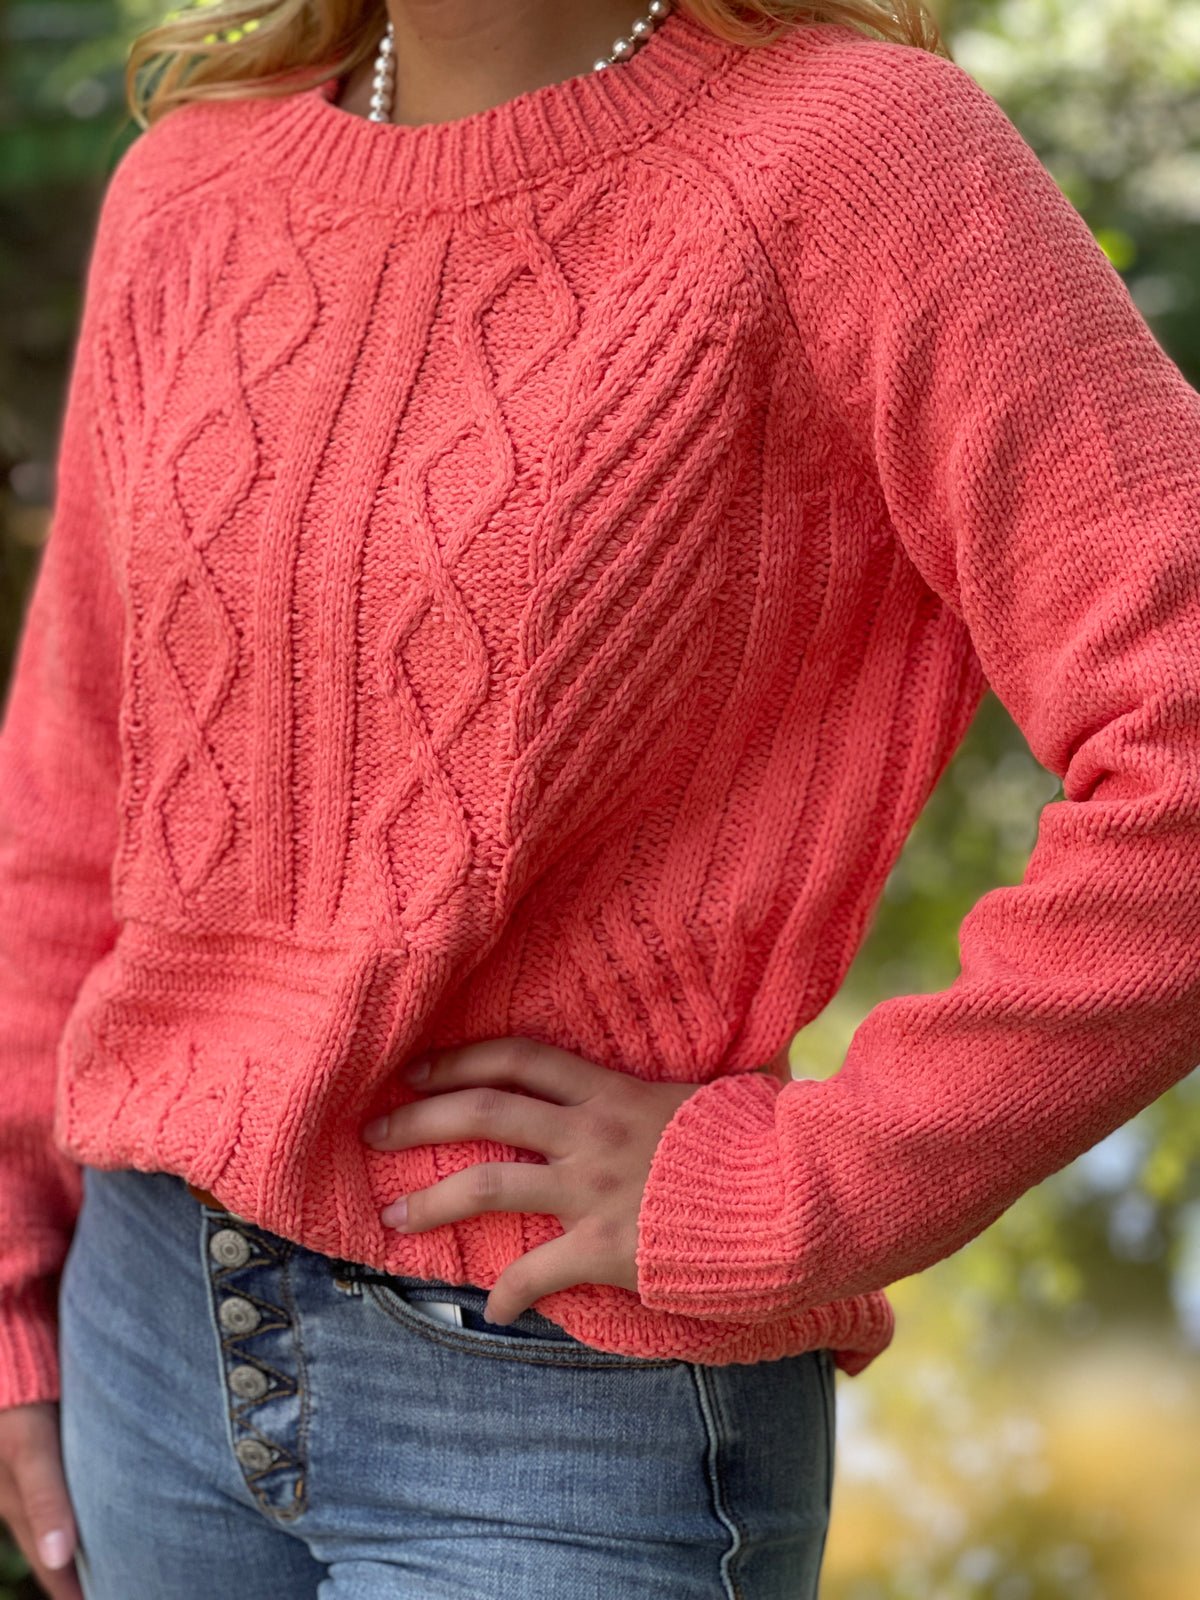 ORANGE CABLE KNIT CHENILLE YARN SWEATER